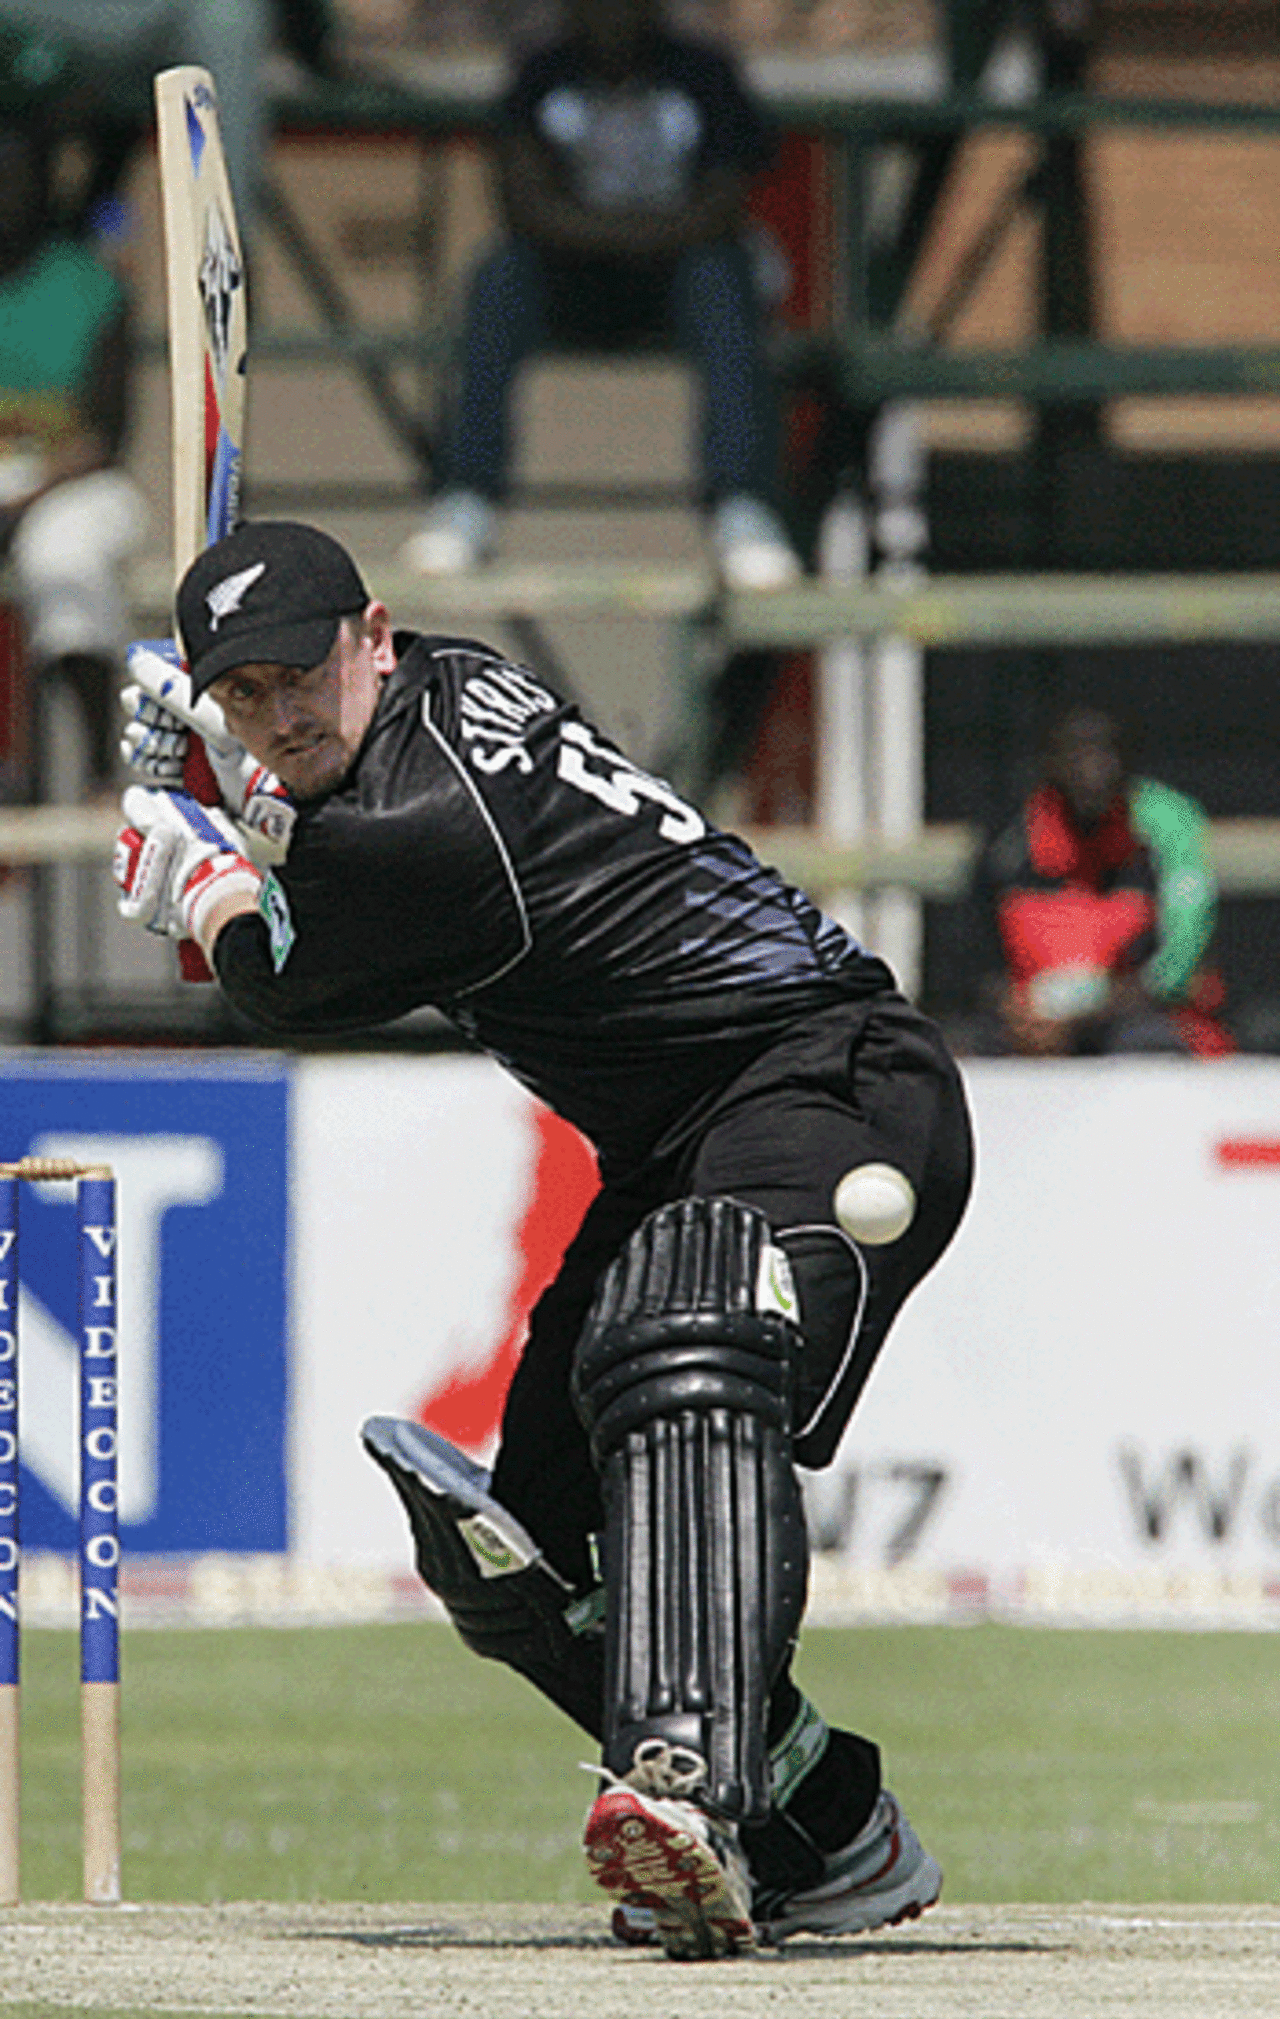 Scott Styris prepares to free his arms during his knock of 63, Zimbabwe v New Zealand, Harare, August 31, 2005
